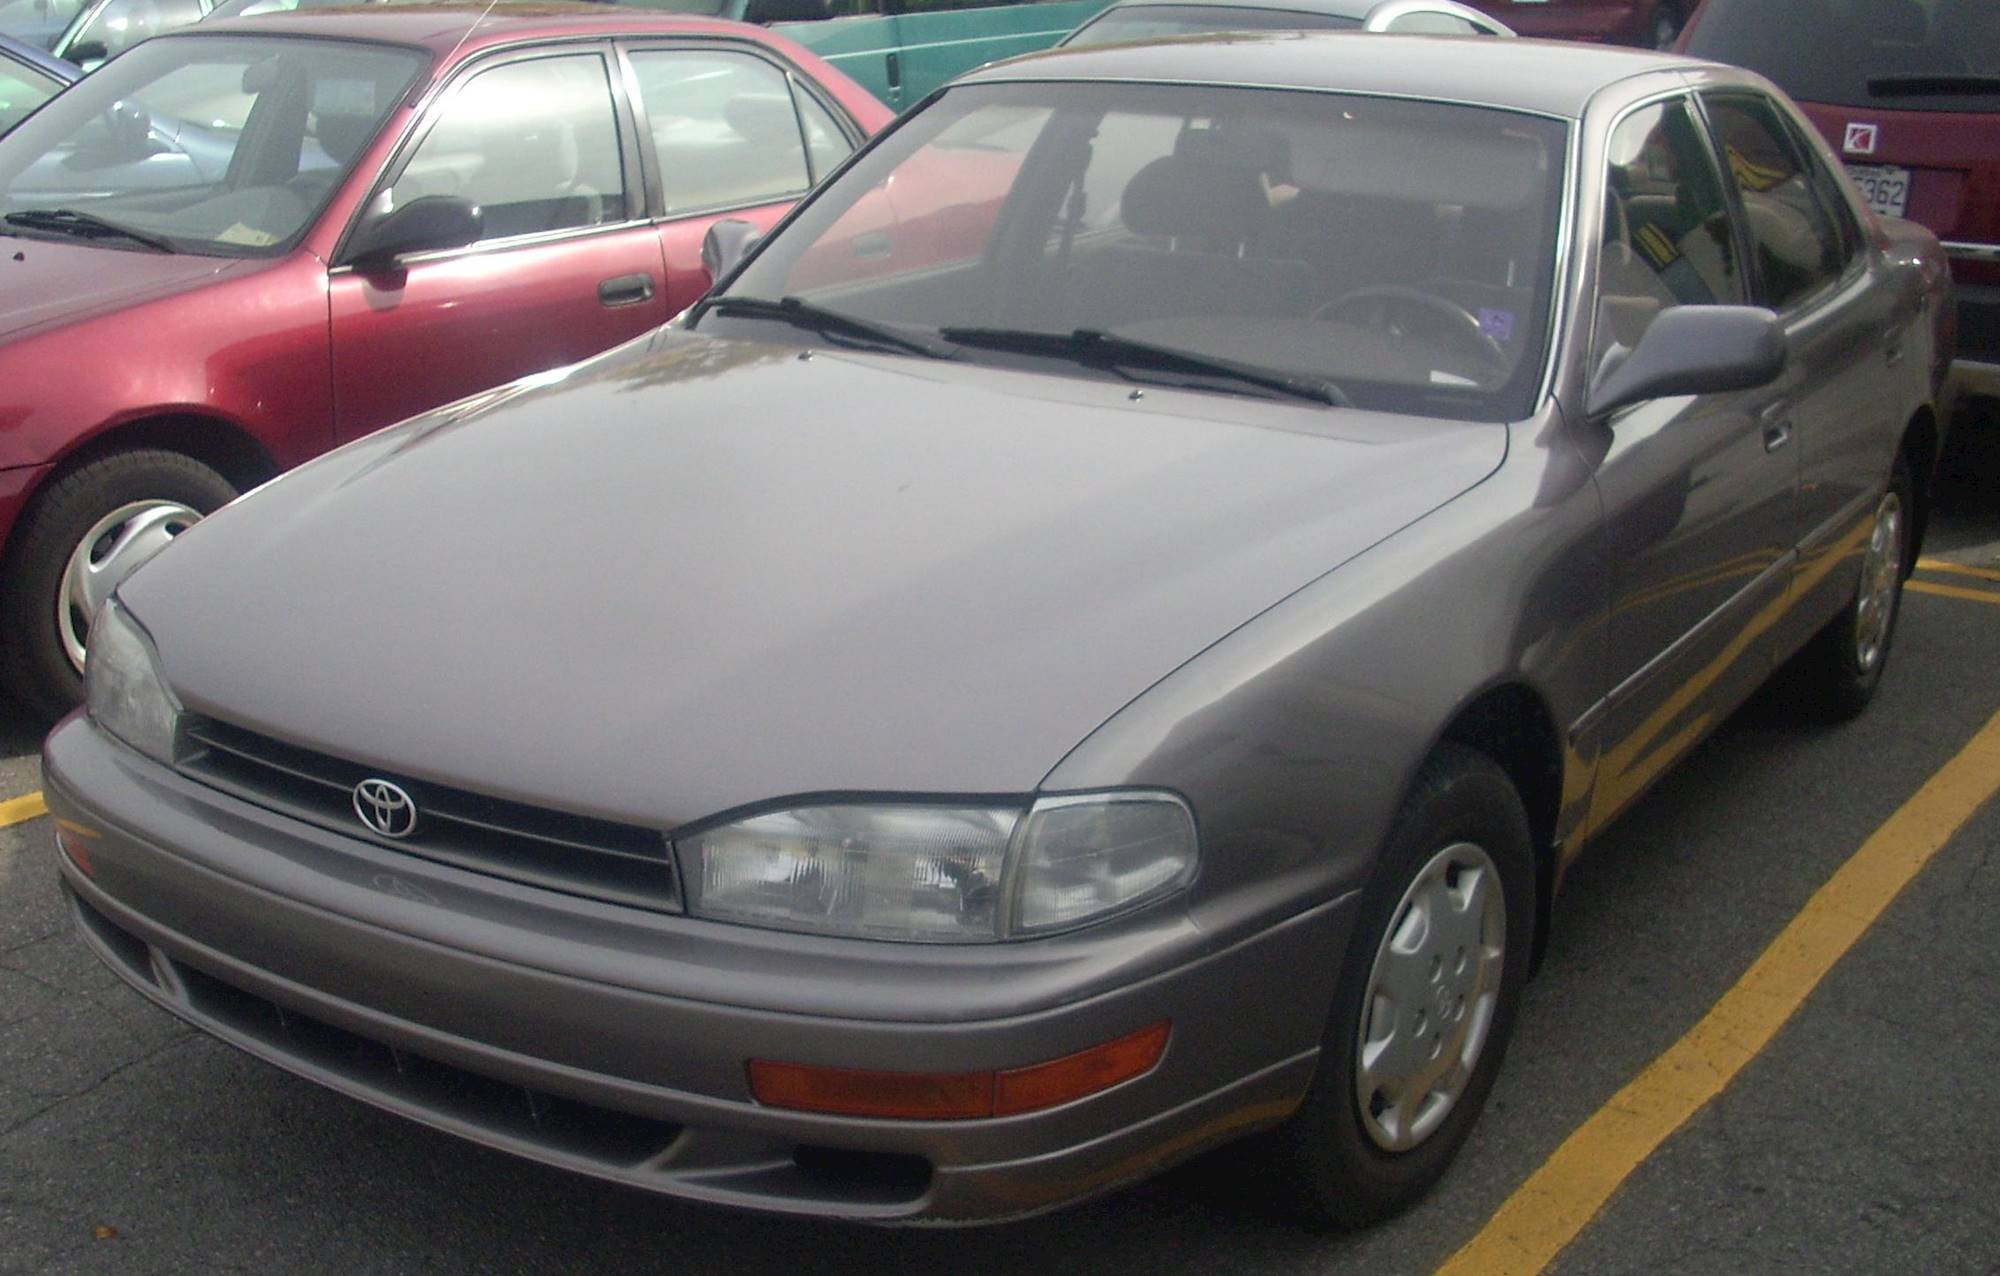 Used 1992 Toyota Camry for Sale in Hasbrouck Heights NJ  Carscom